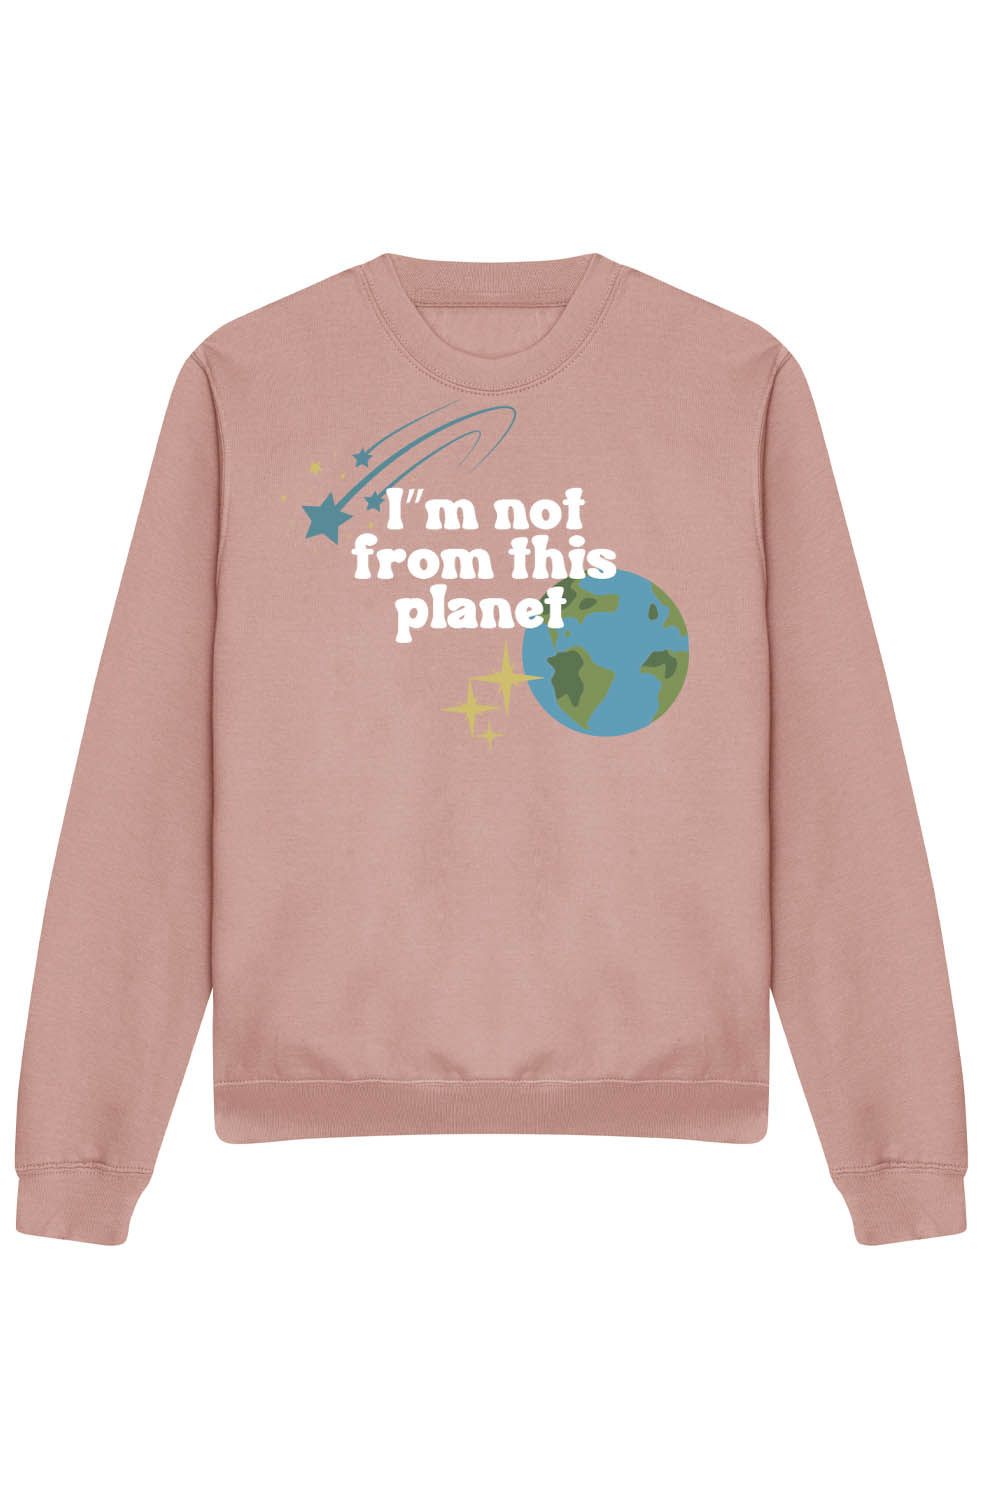 I'm Not From This Planet Sweatshirt in Dusty Pink (Custom Packs)